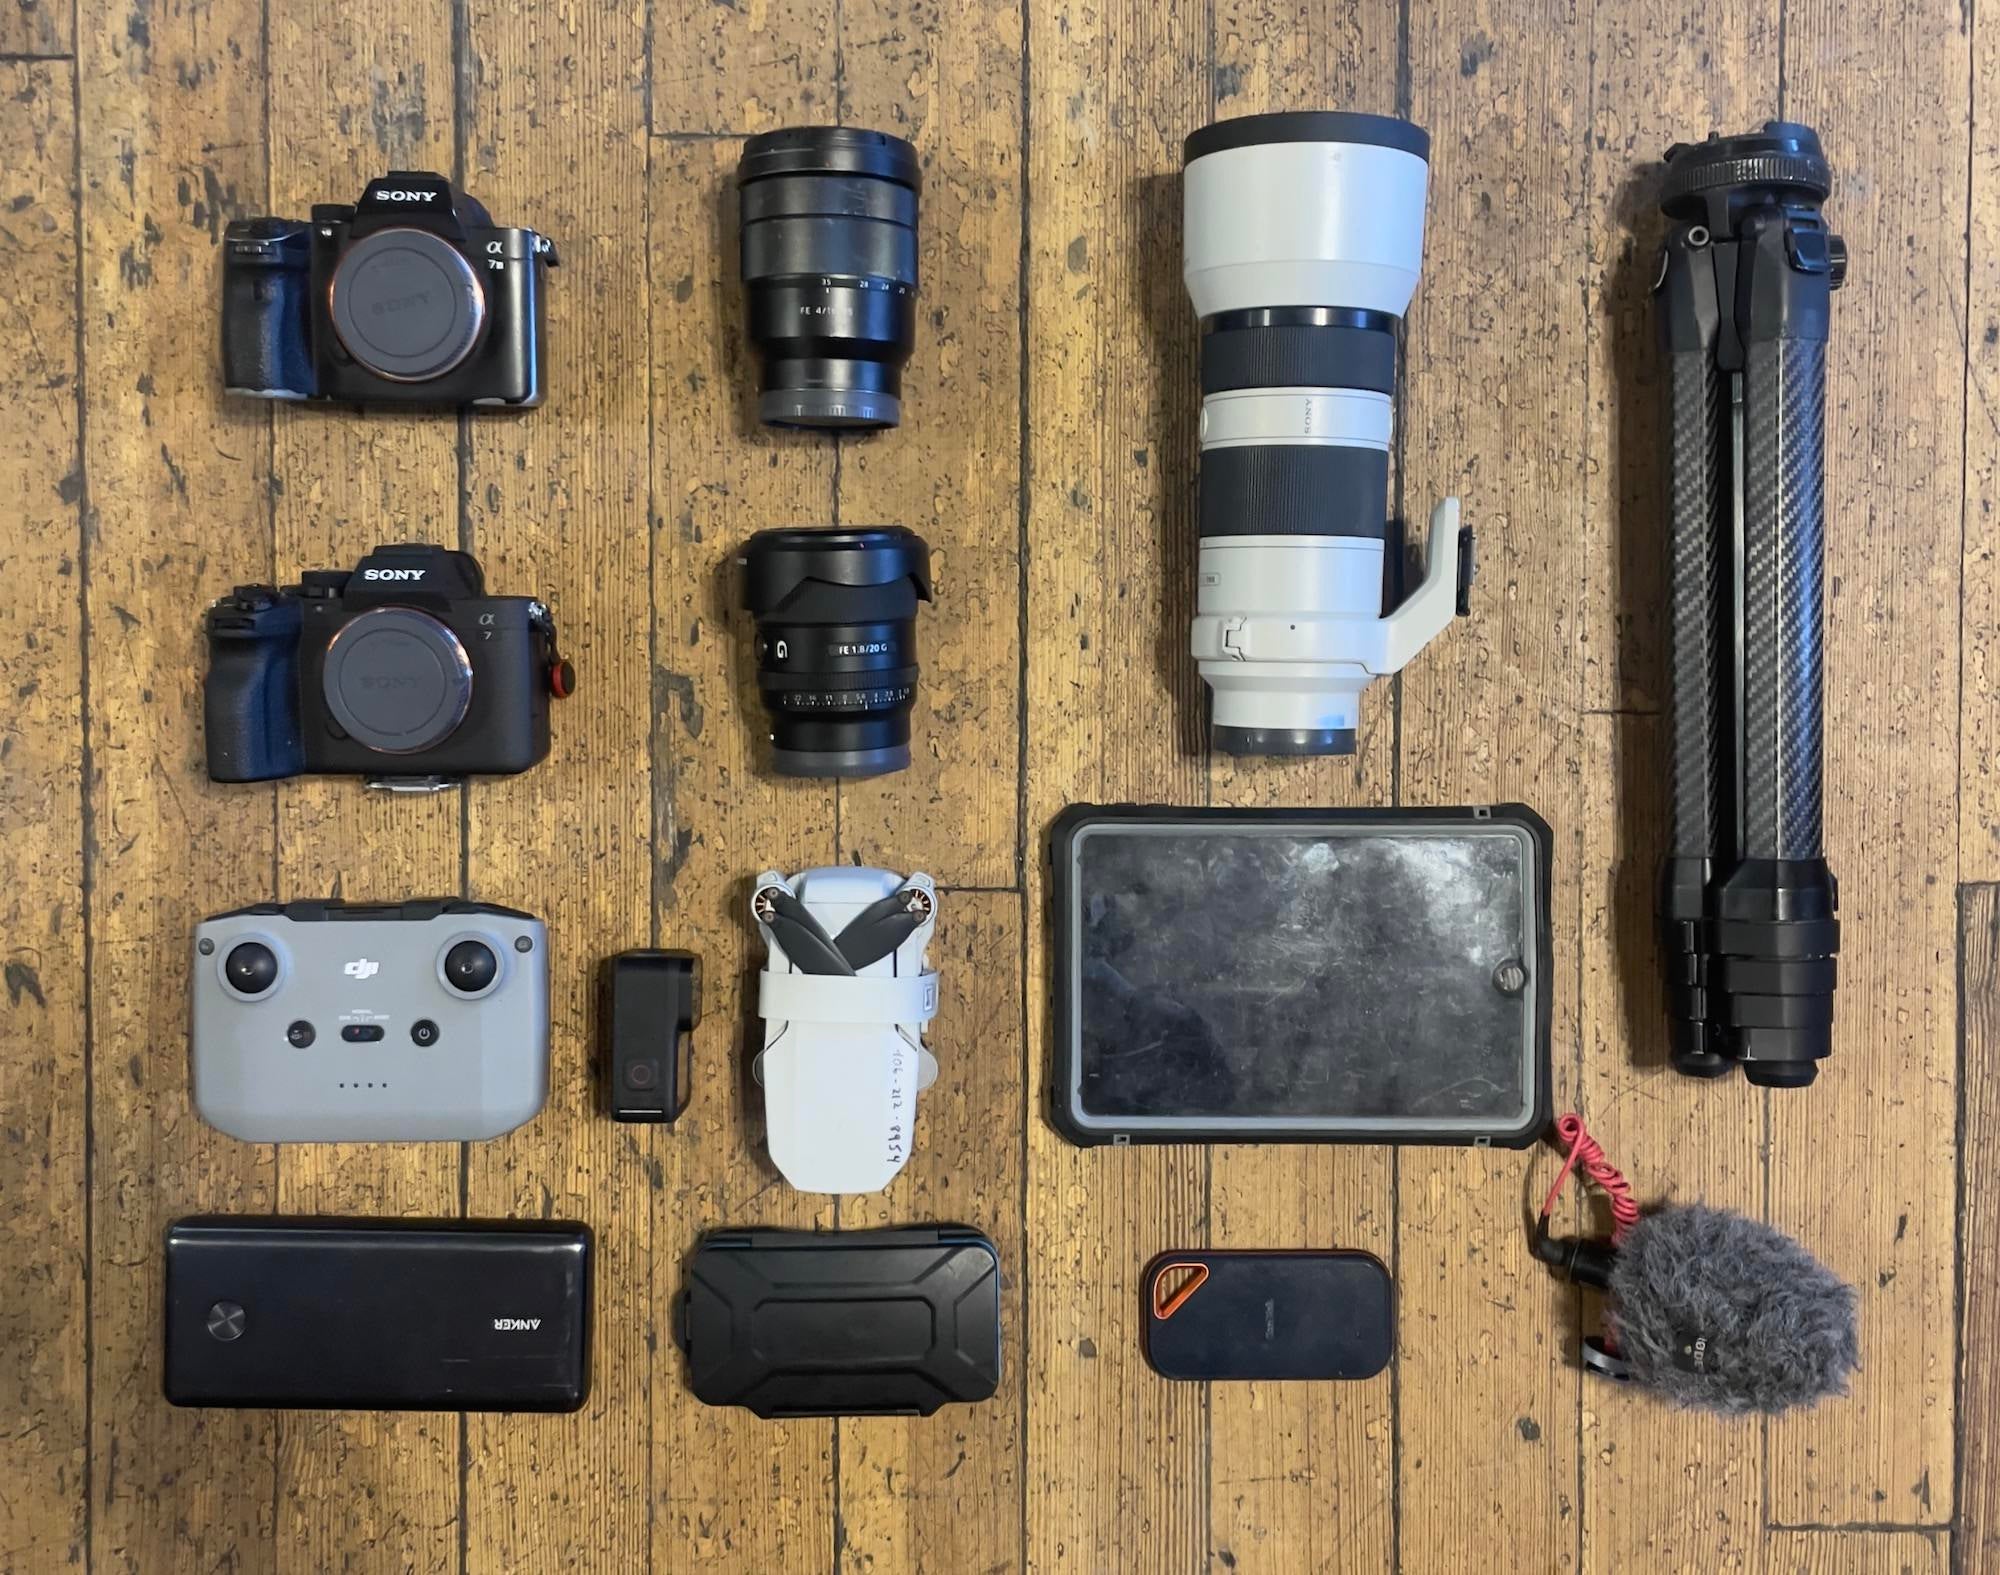 Jeff Oliver's photography and vlogging gear